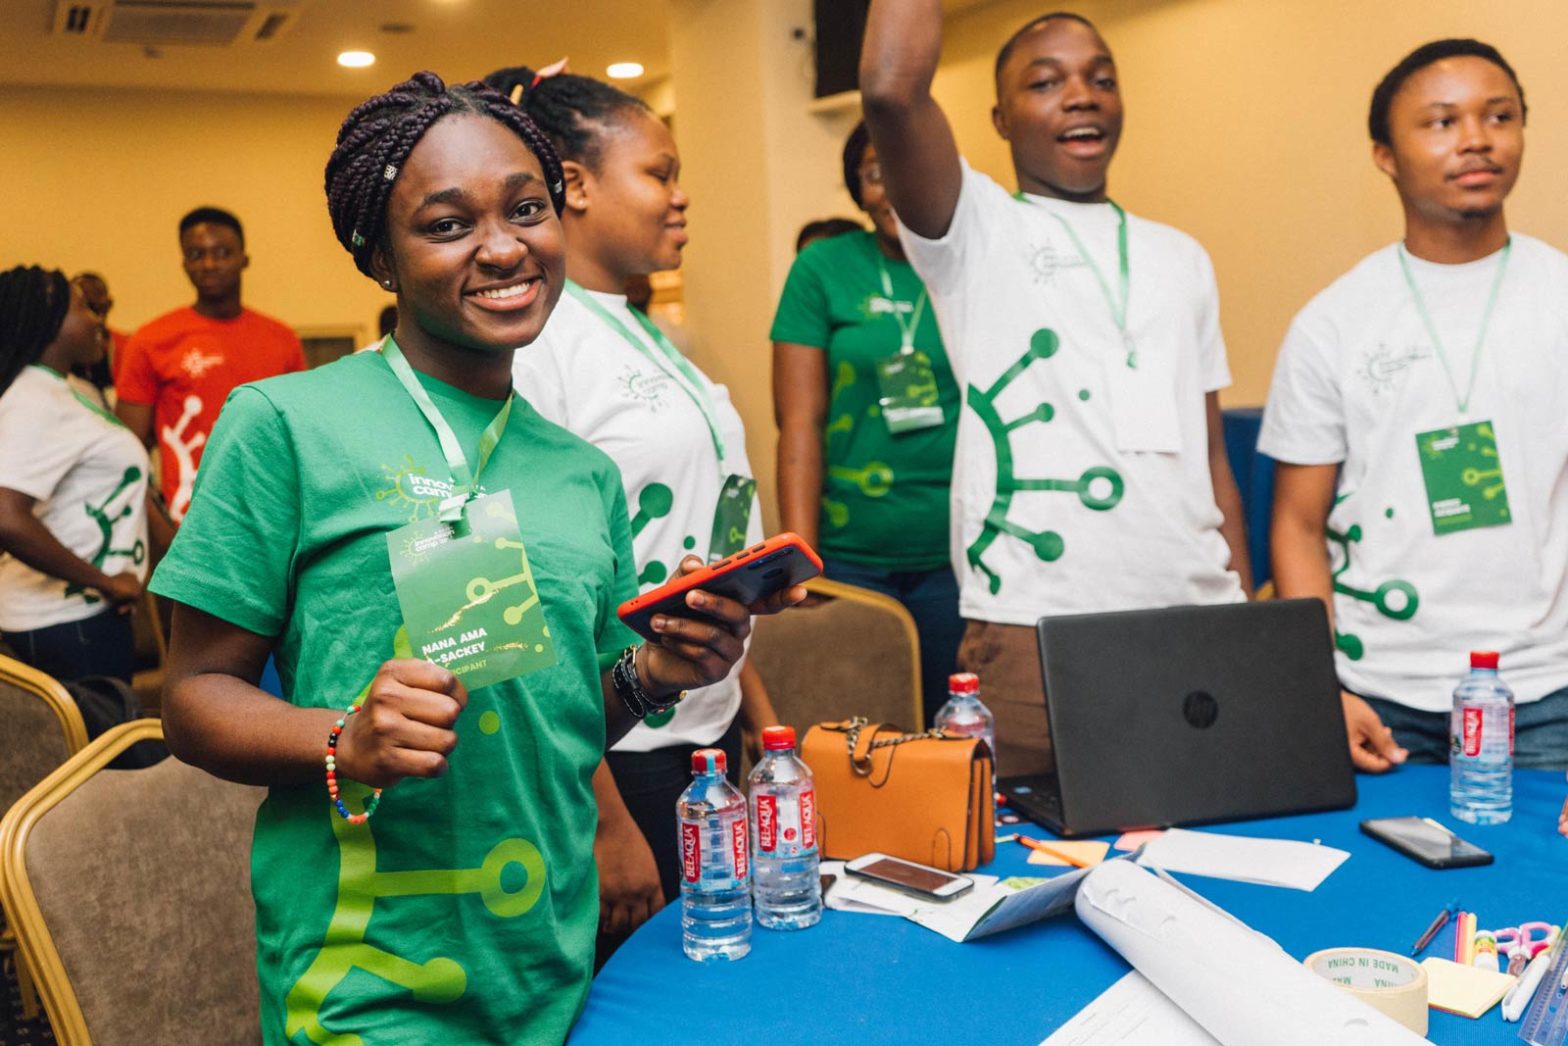 Delta and JA Africa Partner To Advance Business and STEM Education On The Continent